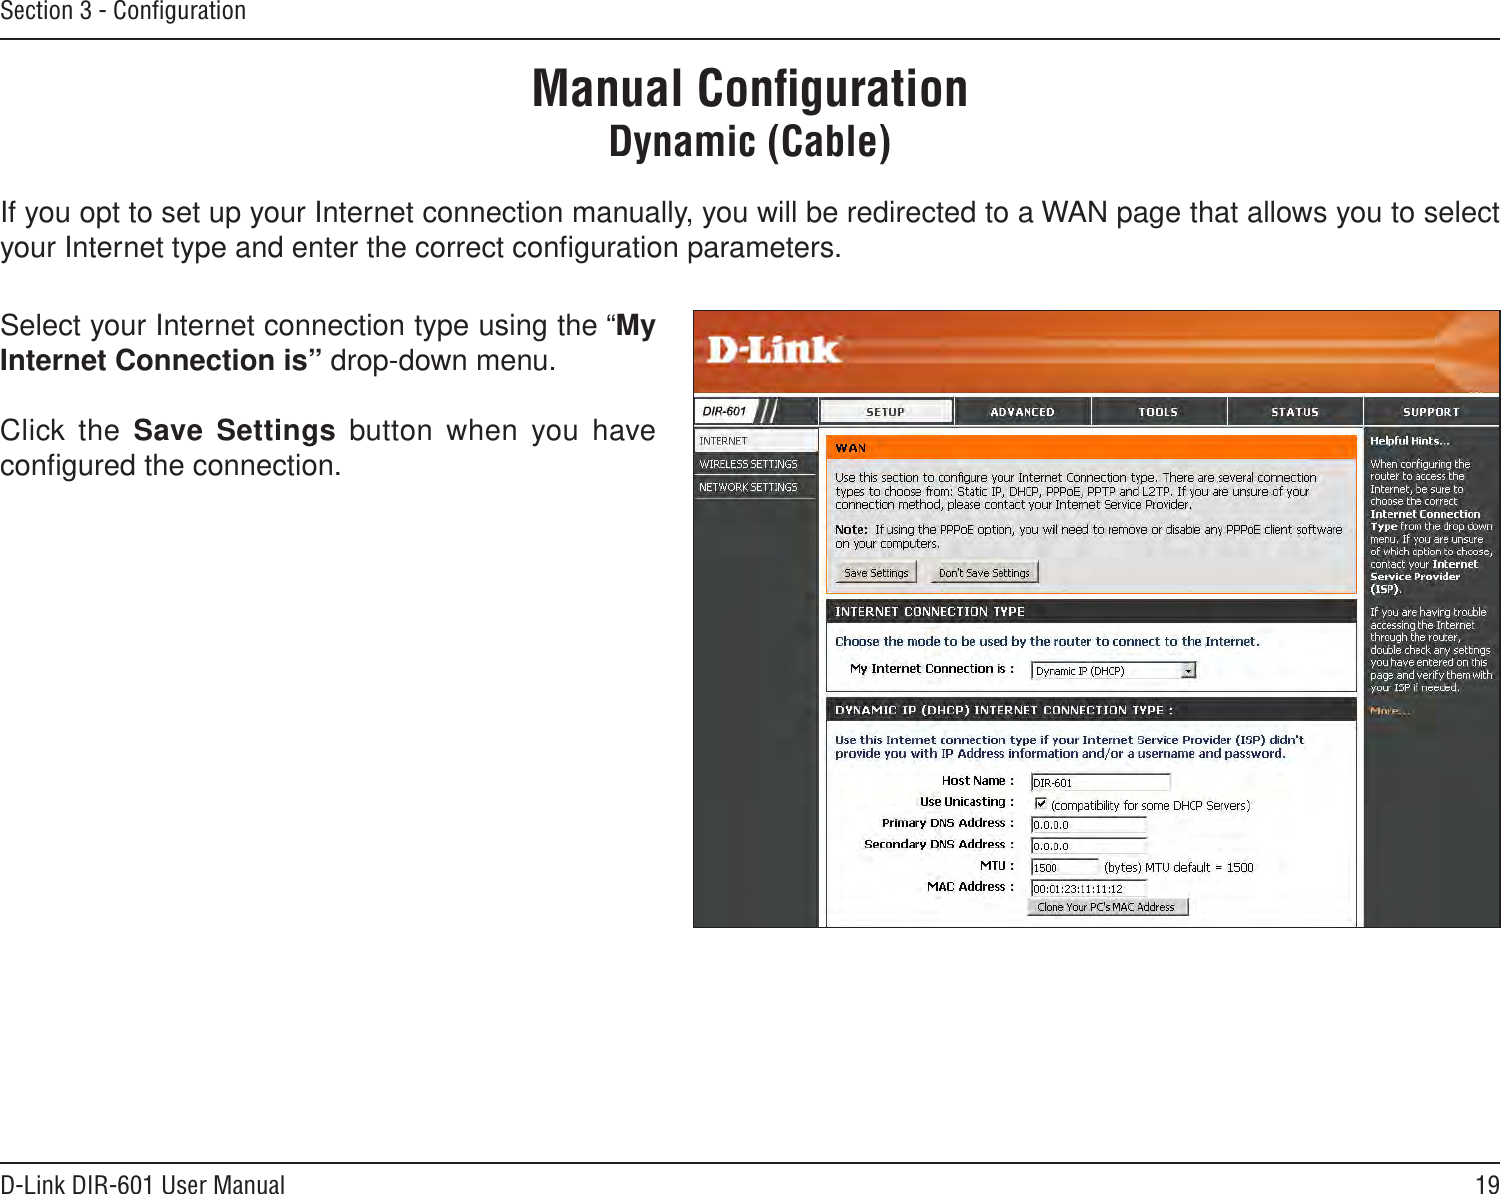 19D-Link DIR-601 User ManualSection 3 - ConﬁgurationIf you opt to set up your Internet connection manually, you will be redirected to a WAN page that allows you to select your Internet type and enter the correct conﬁguration parameters.Select your Internet connection type using the “My Internet Connection is” drop-down menu.Click the Save Settings button when you have conﬁgured the connection.Manual ConﬁgurationDynamic (Cable)